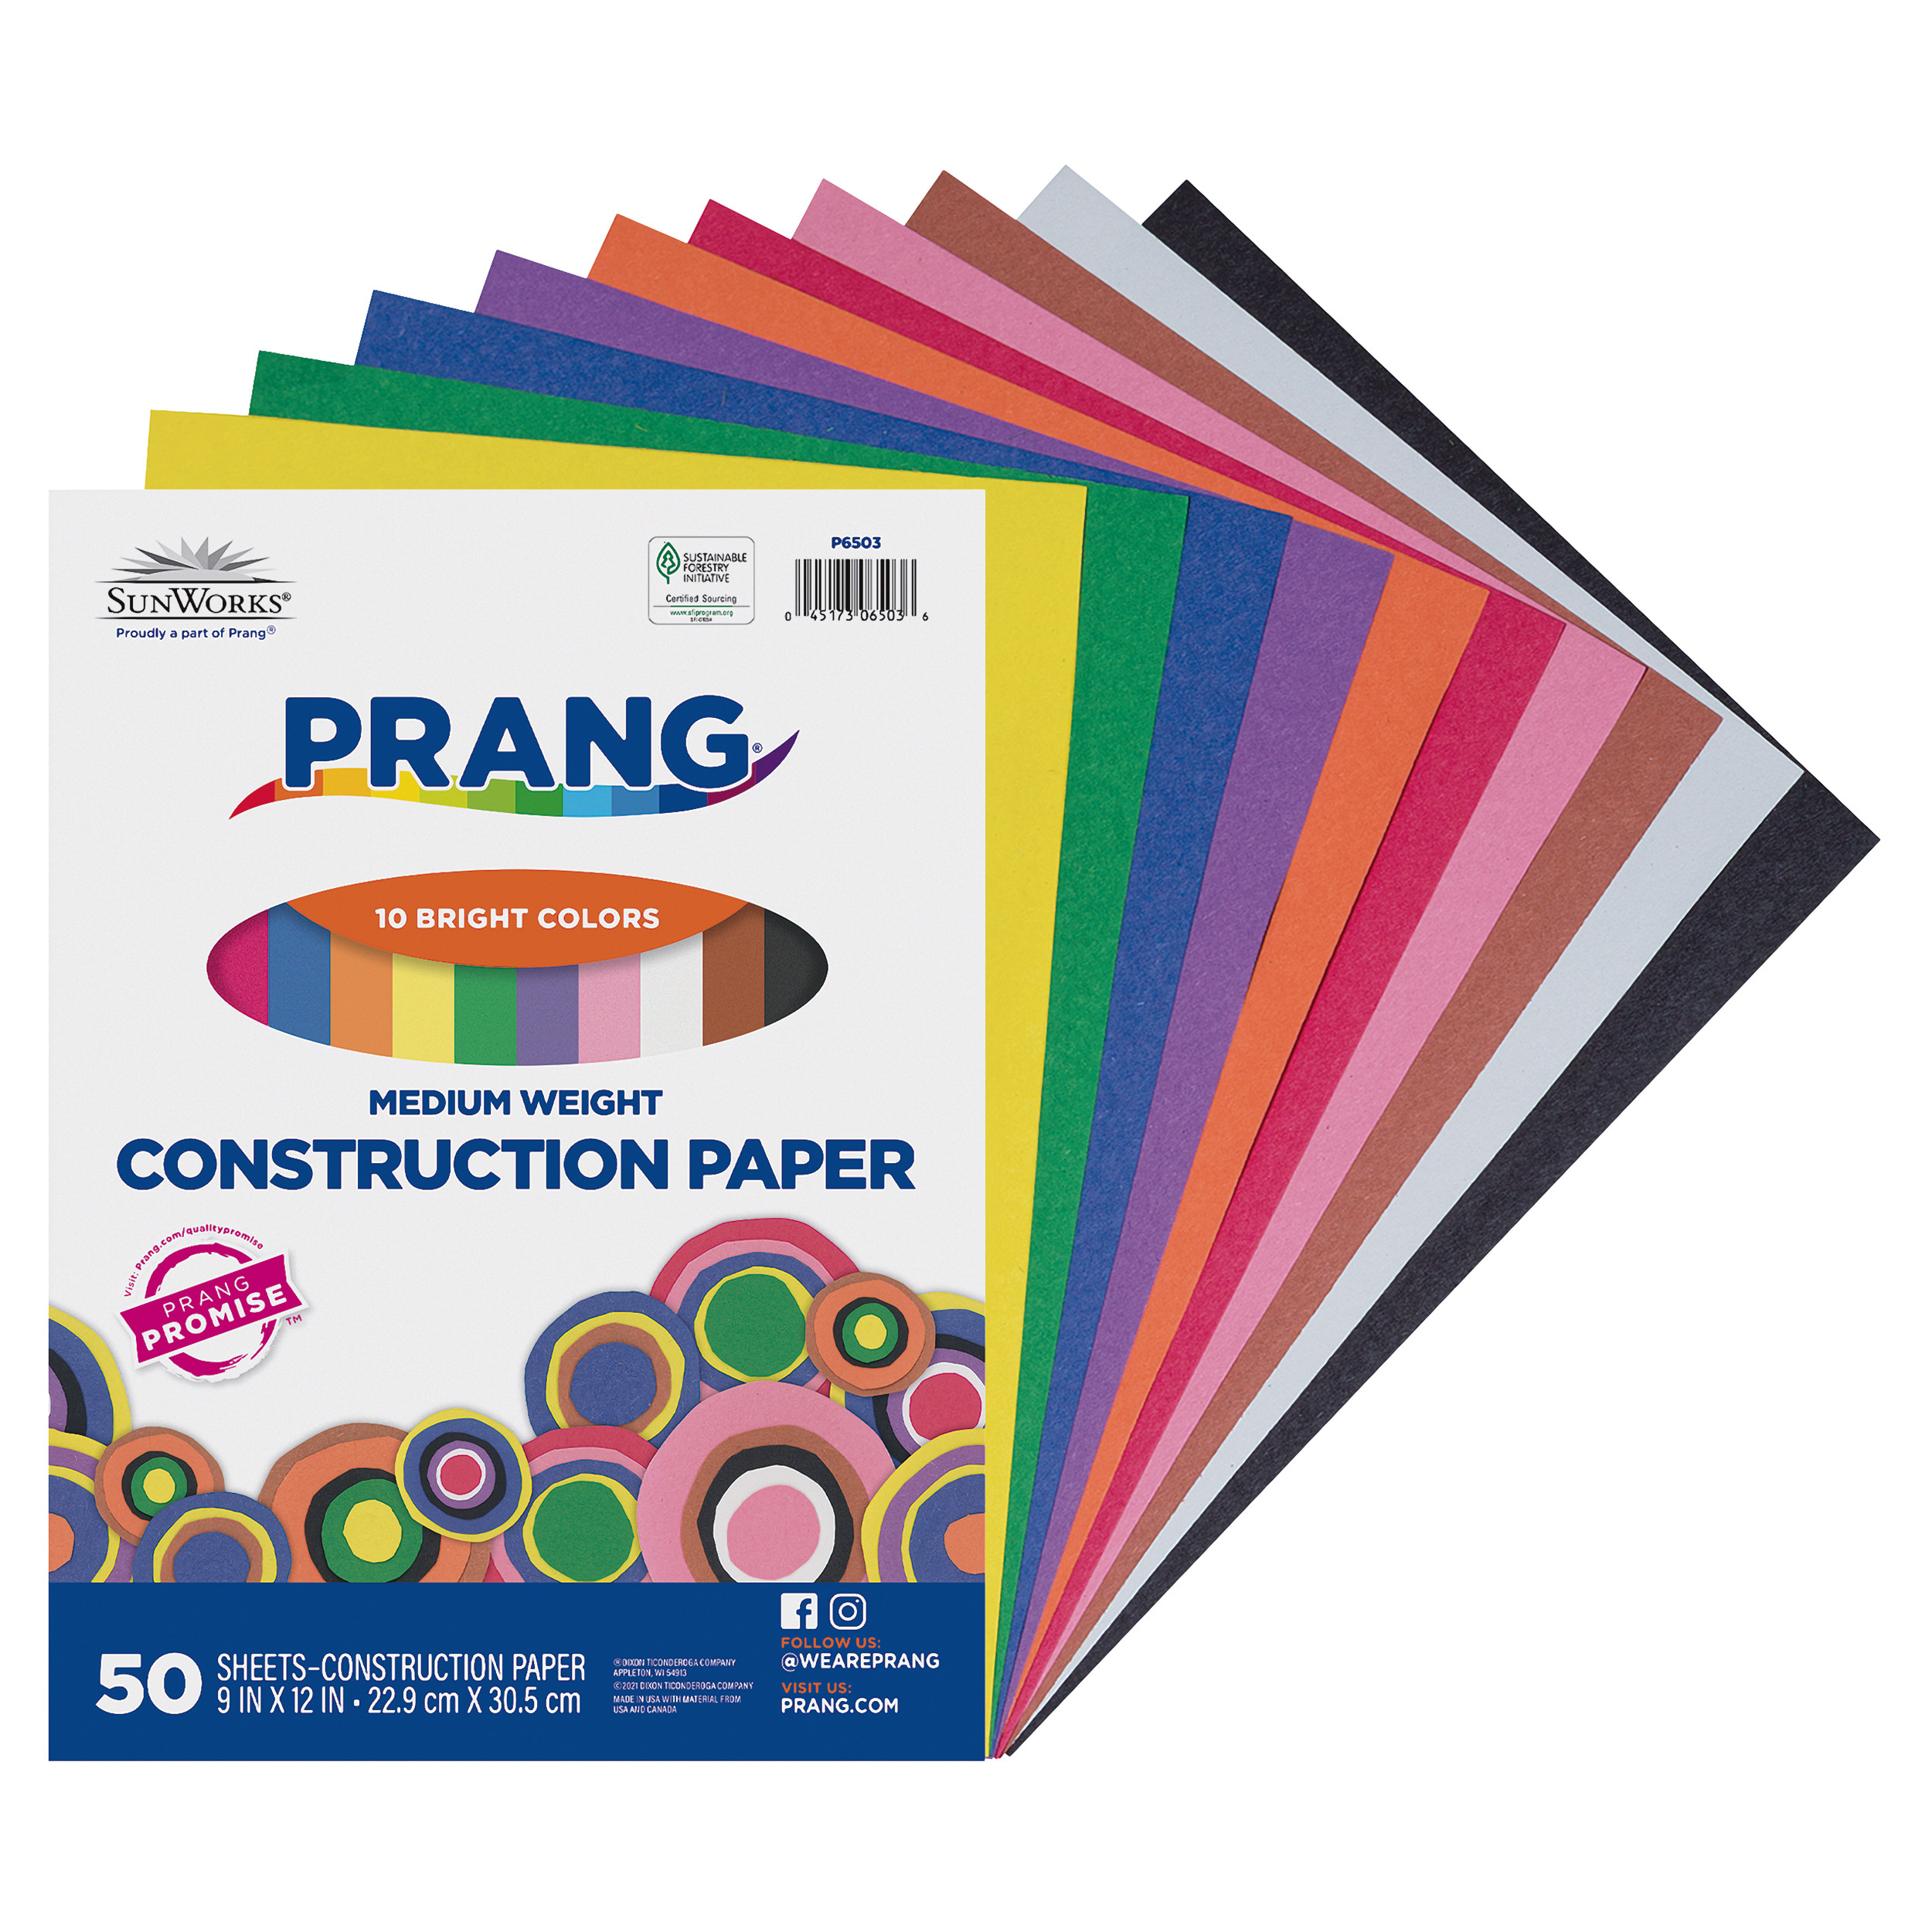 Prang Medium Weight Construction Paper, 12x18 Inches, Violet, Pack